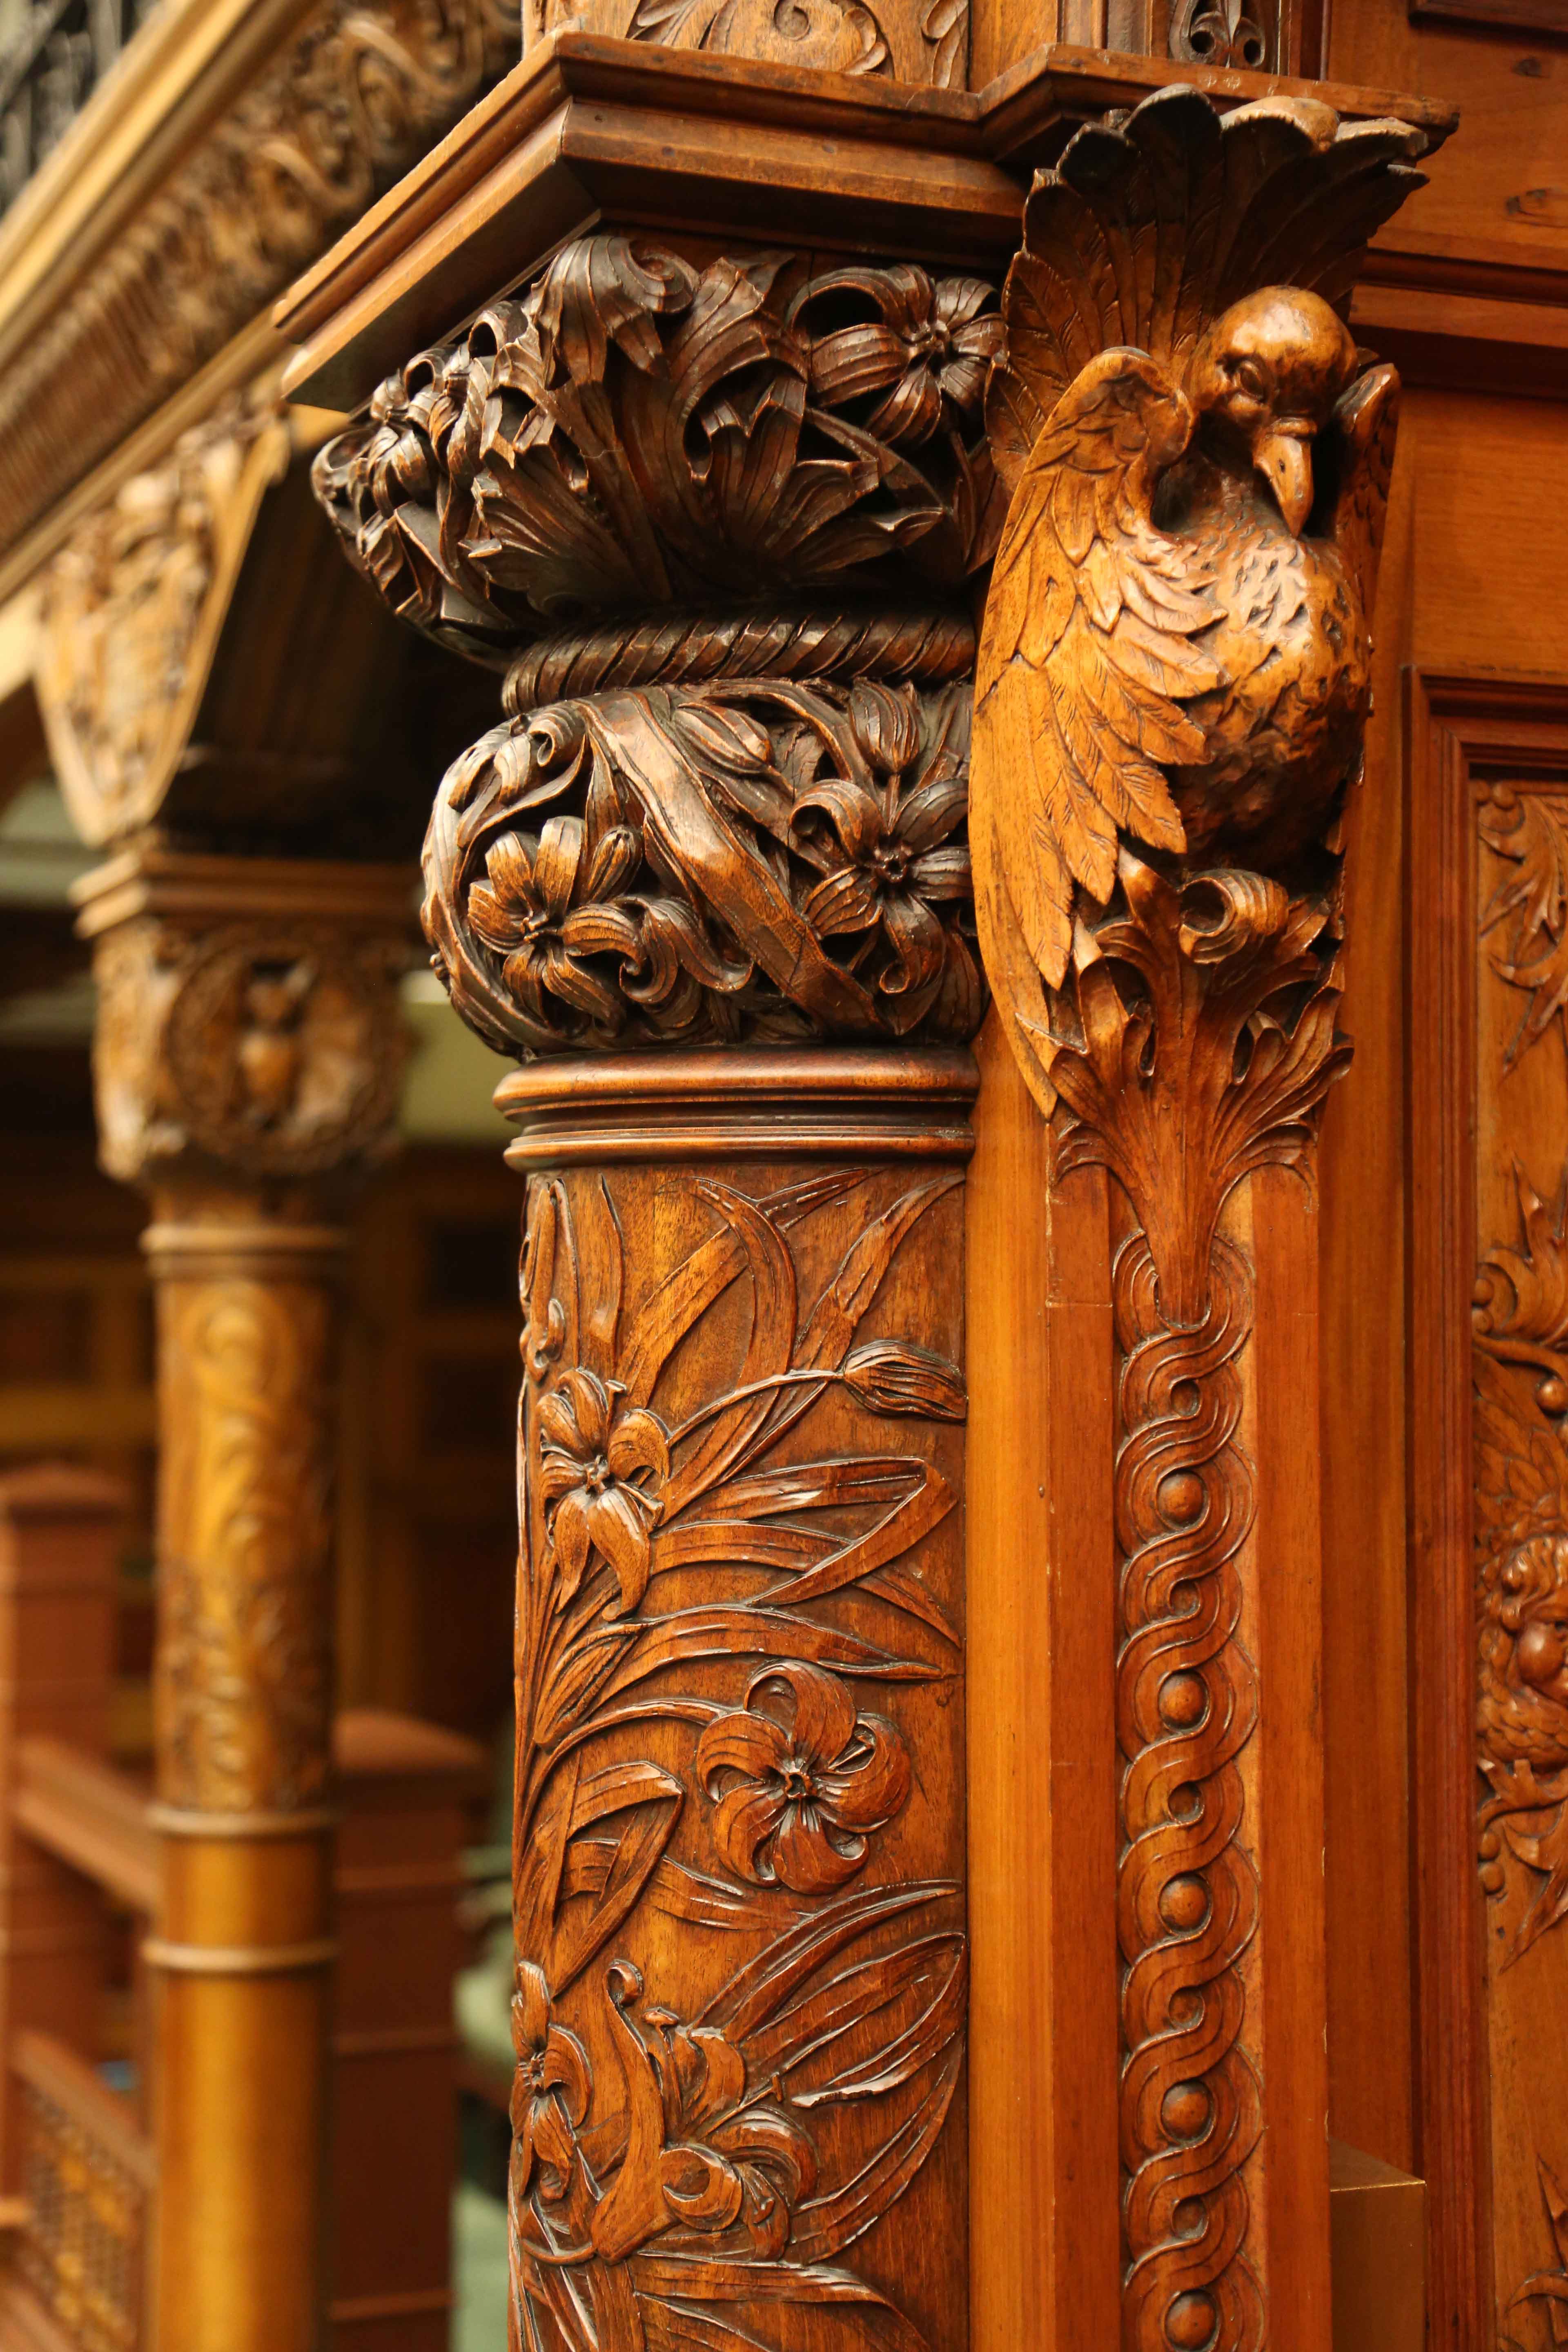 Chamber carving details